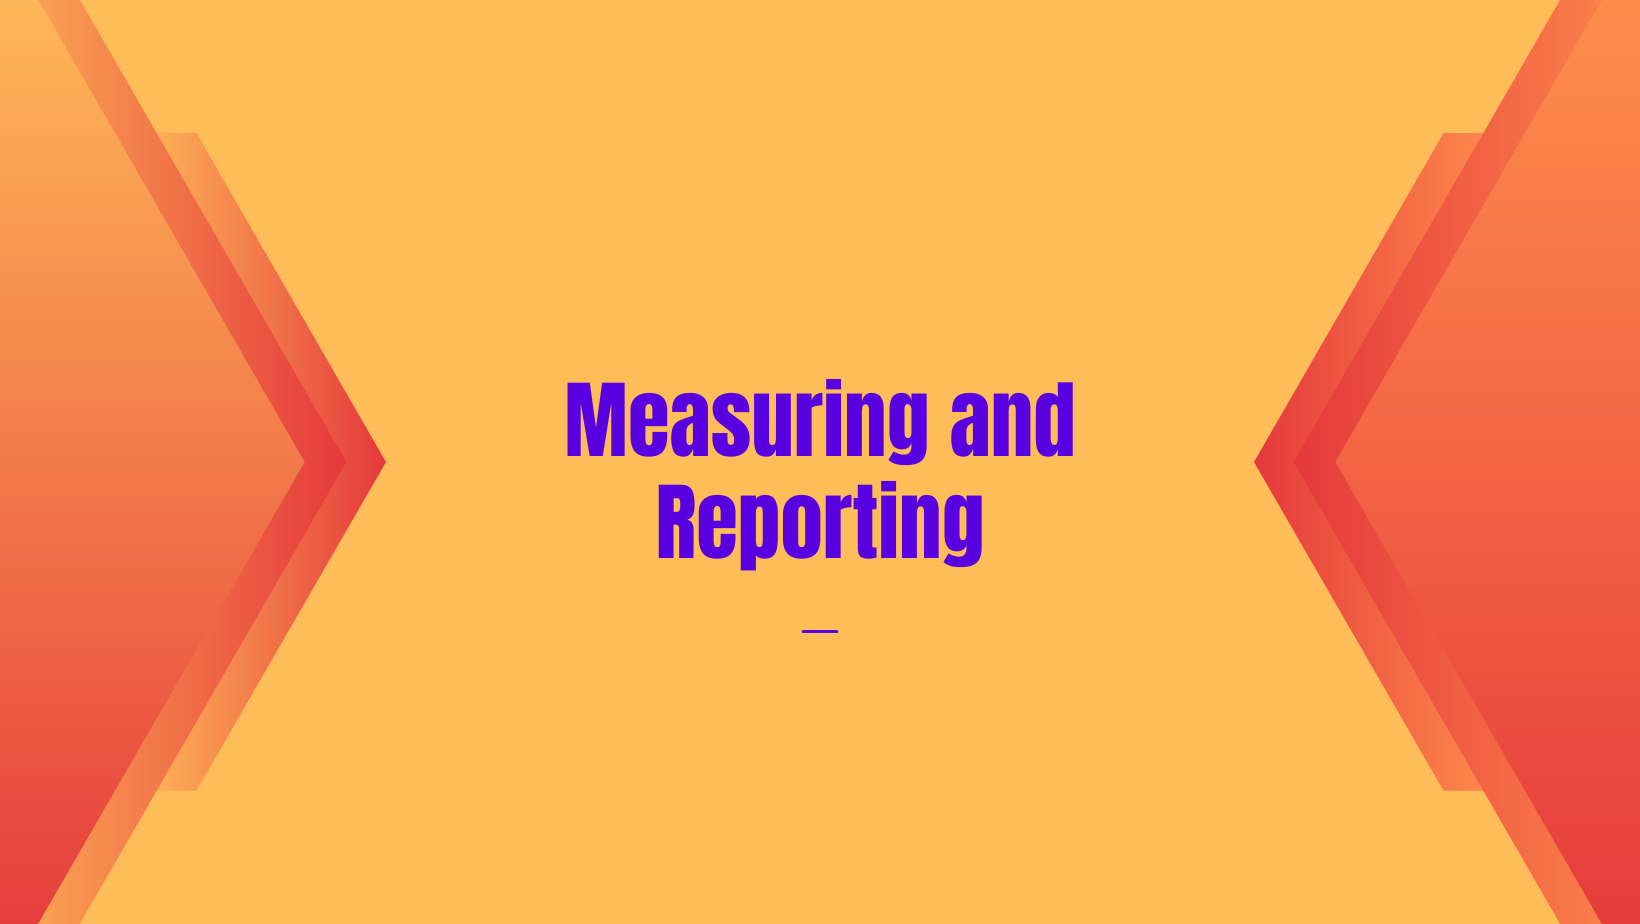 Measuring and Reporting